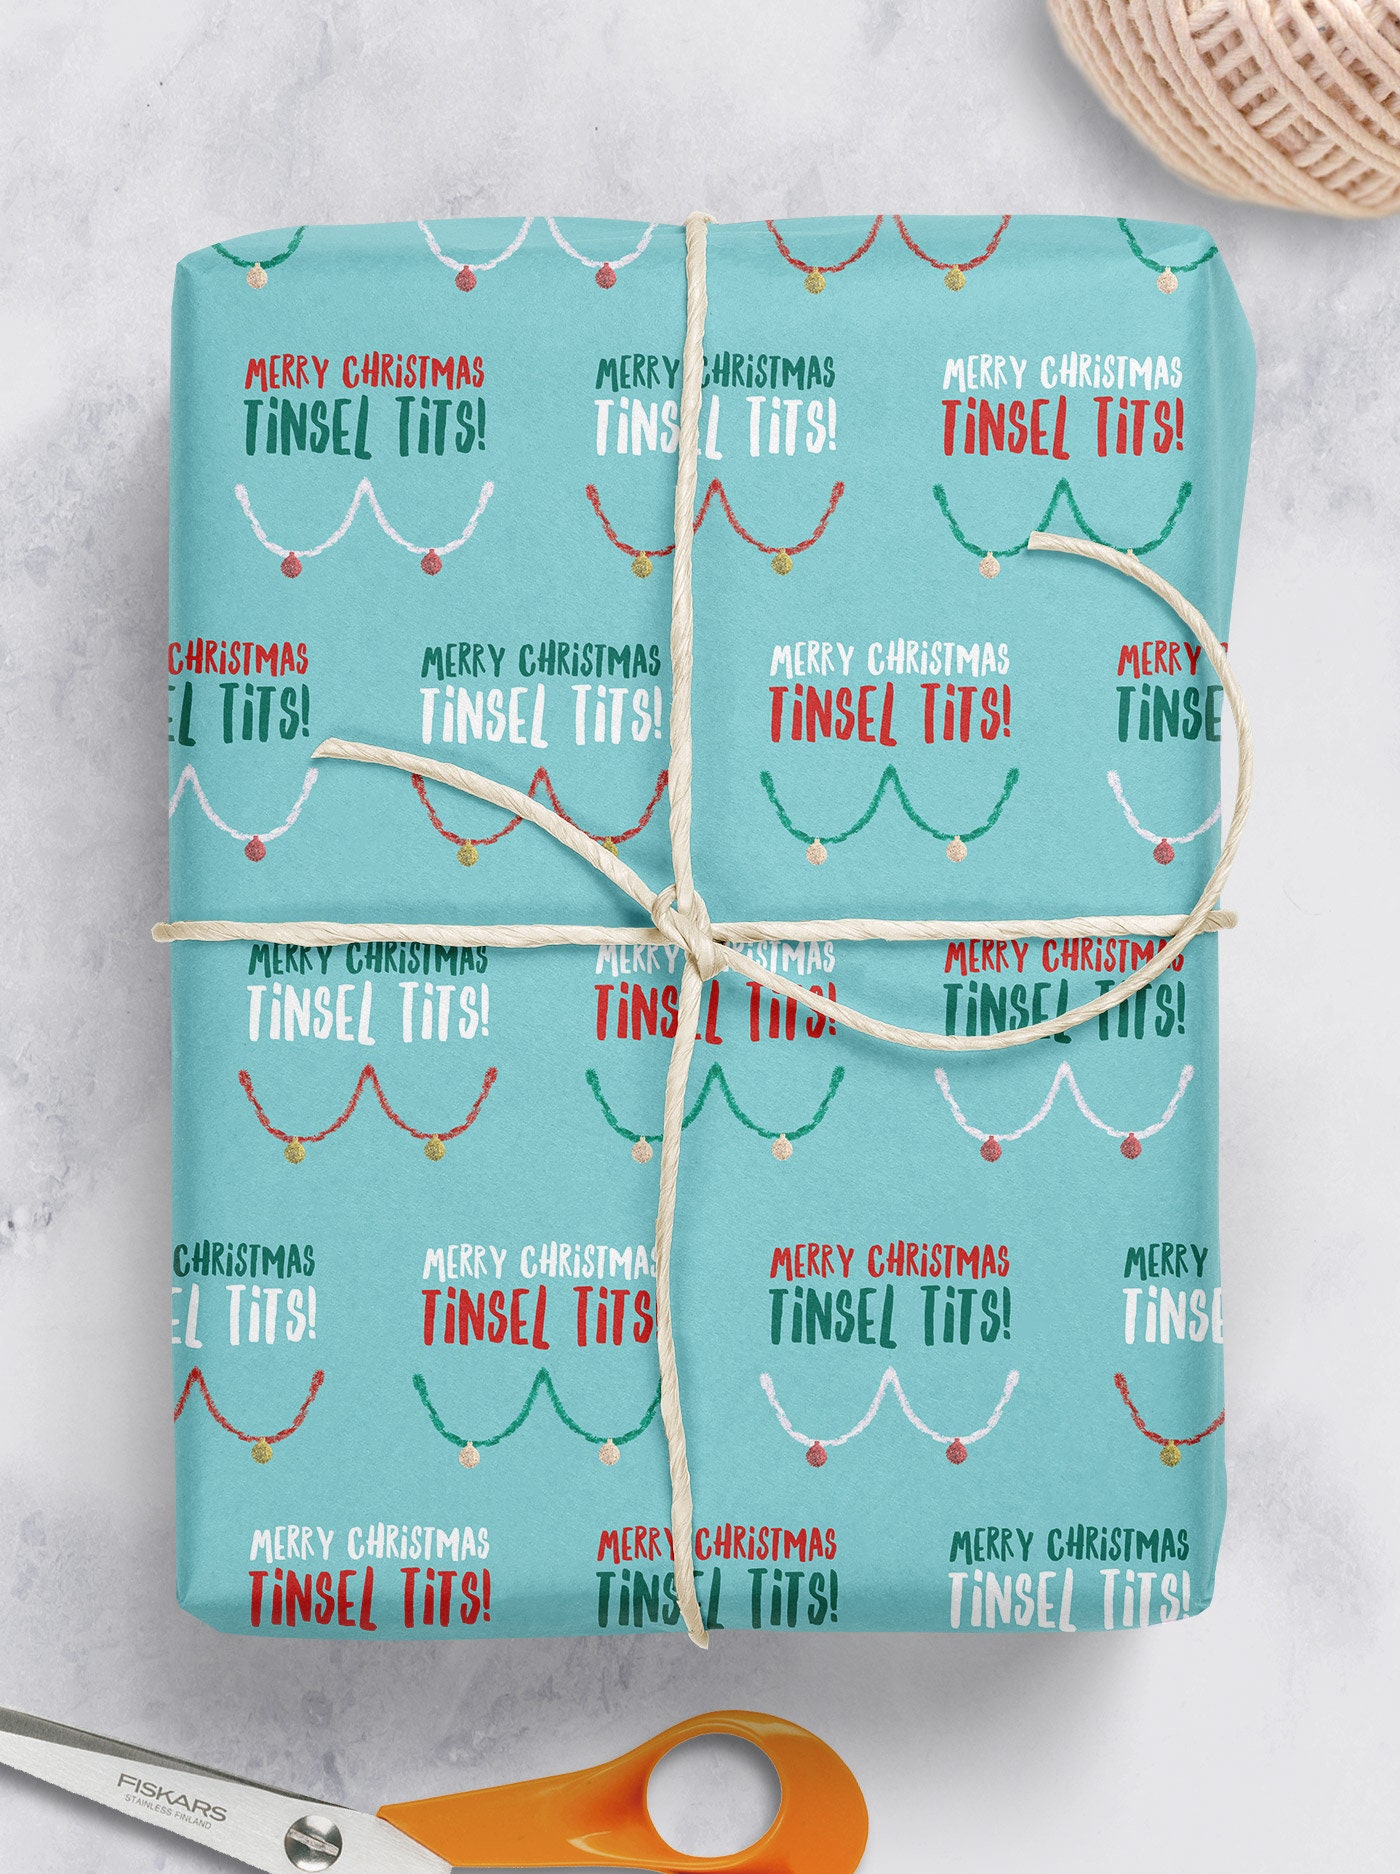 Cute Funny Heard Love Wrapping Paper